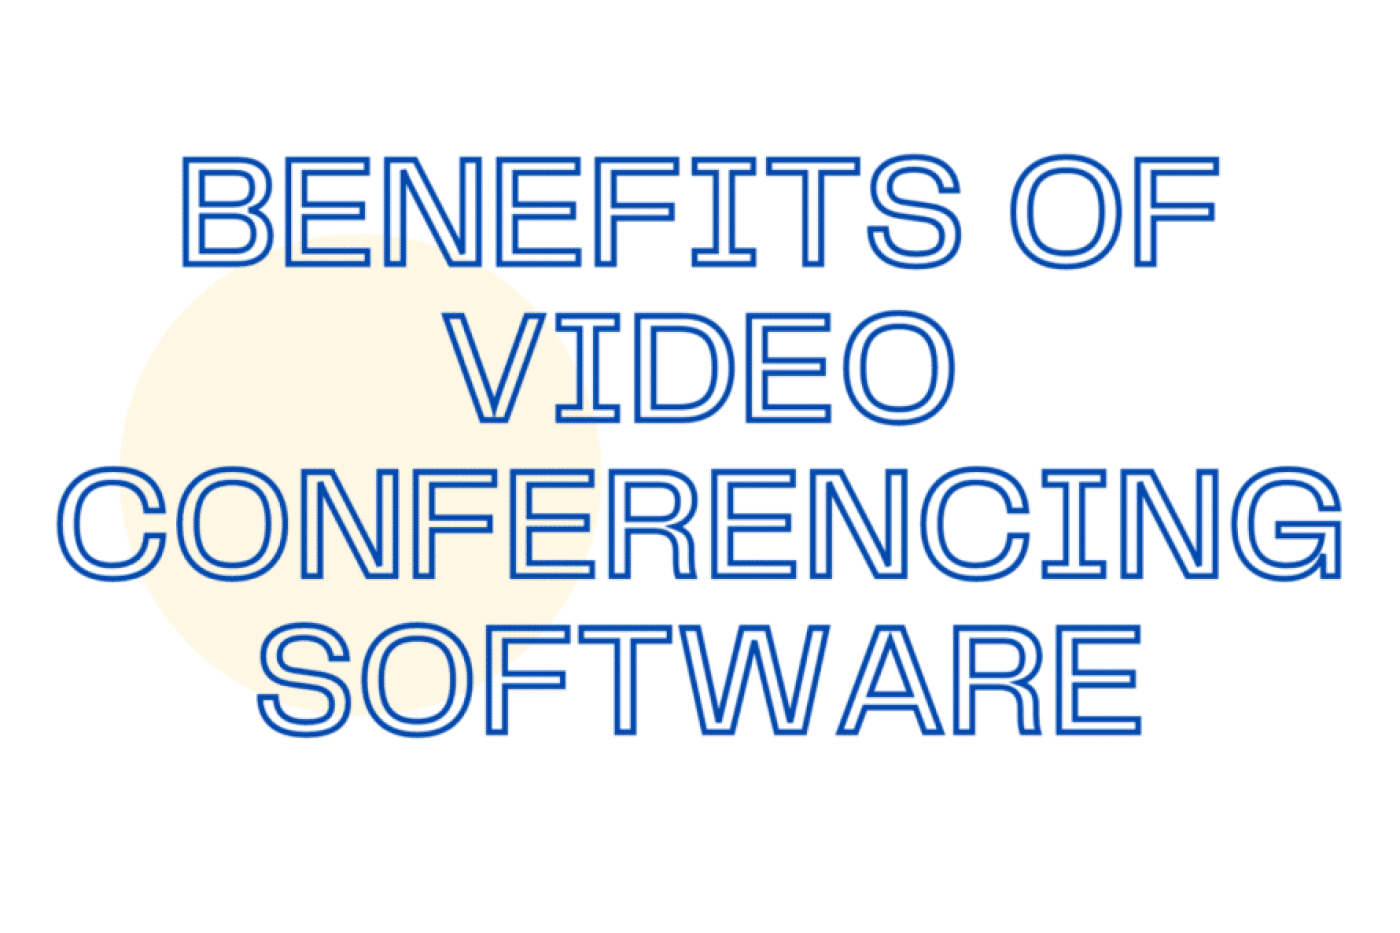 Benefits Of Video Conferencing Software